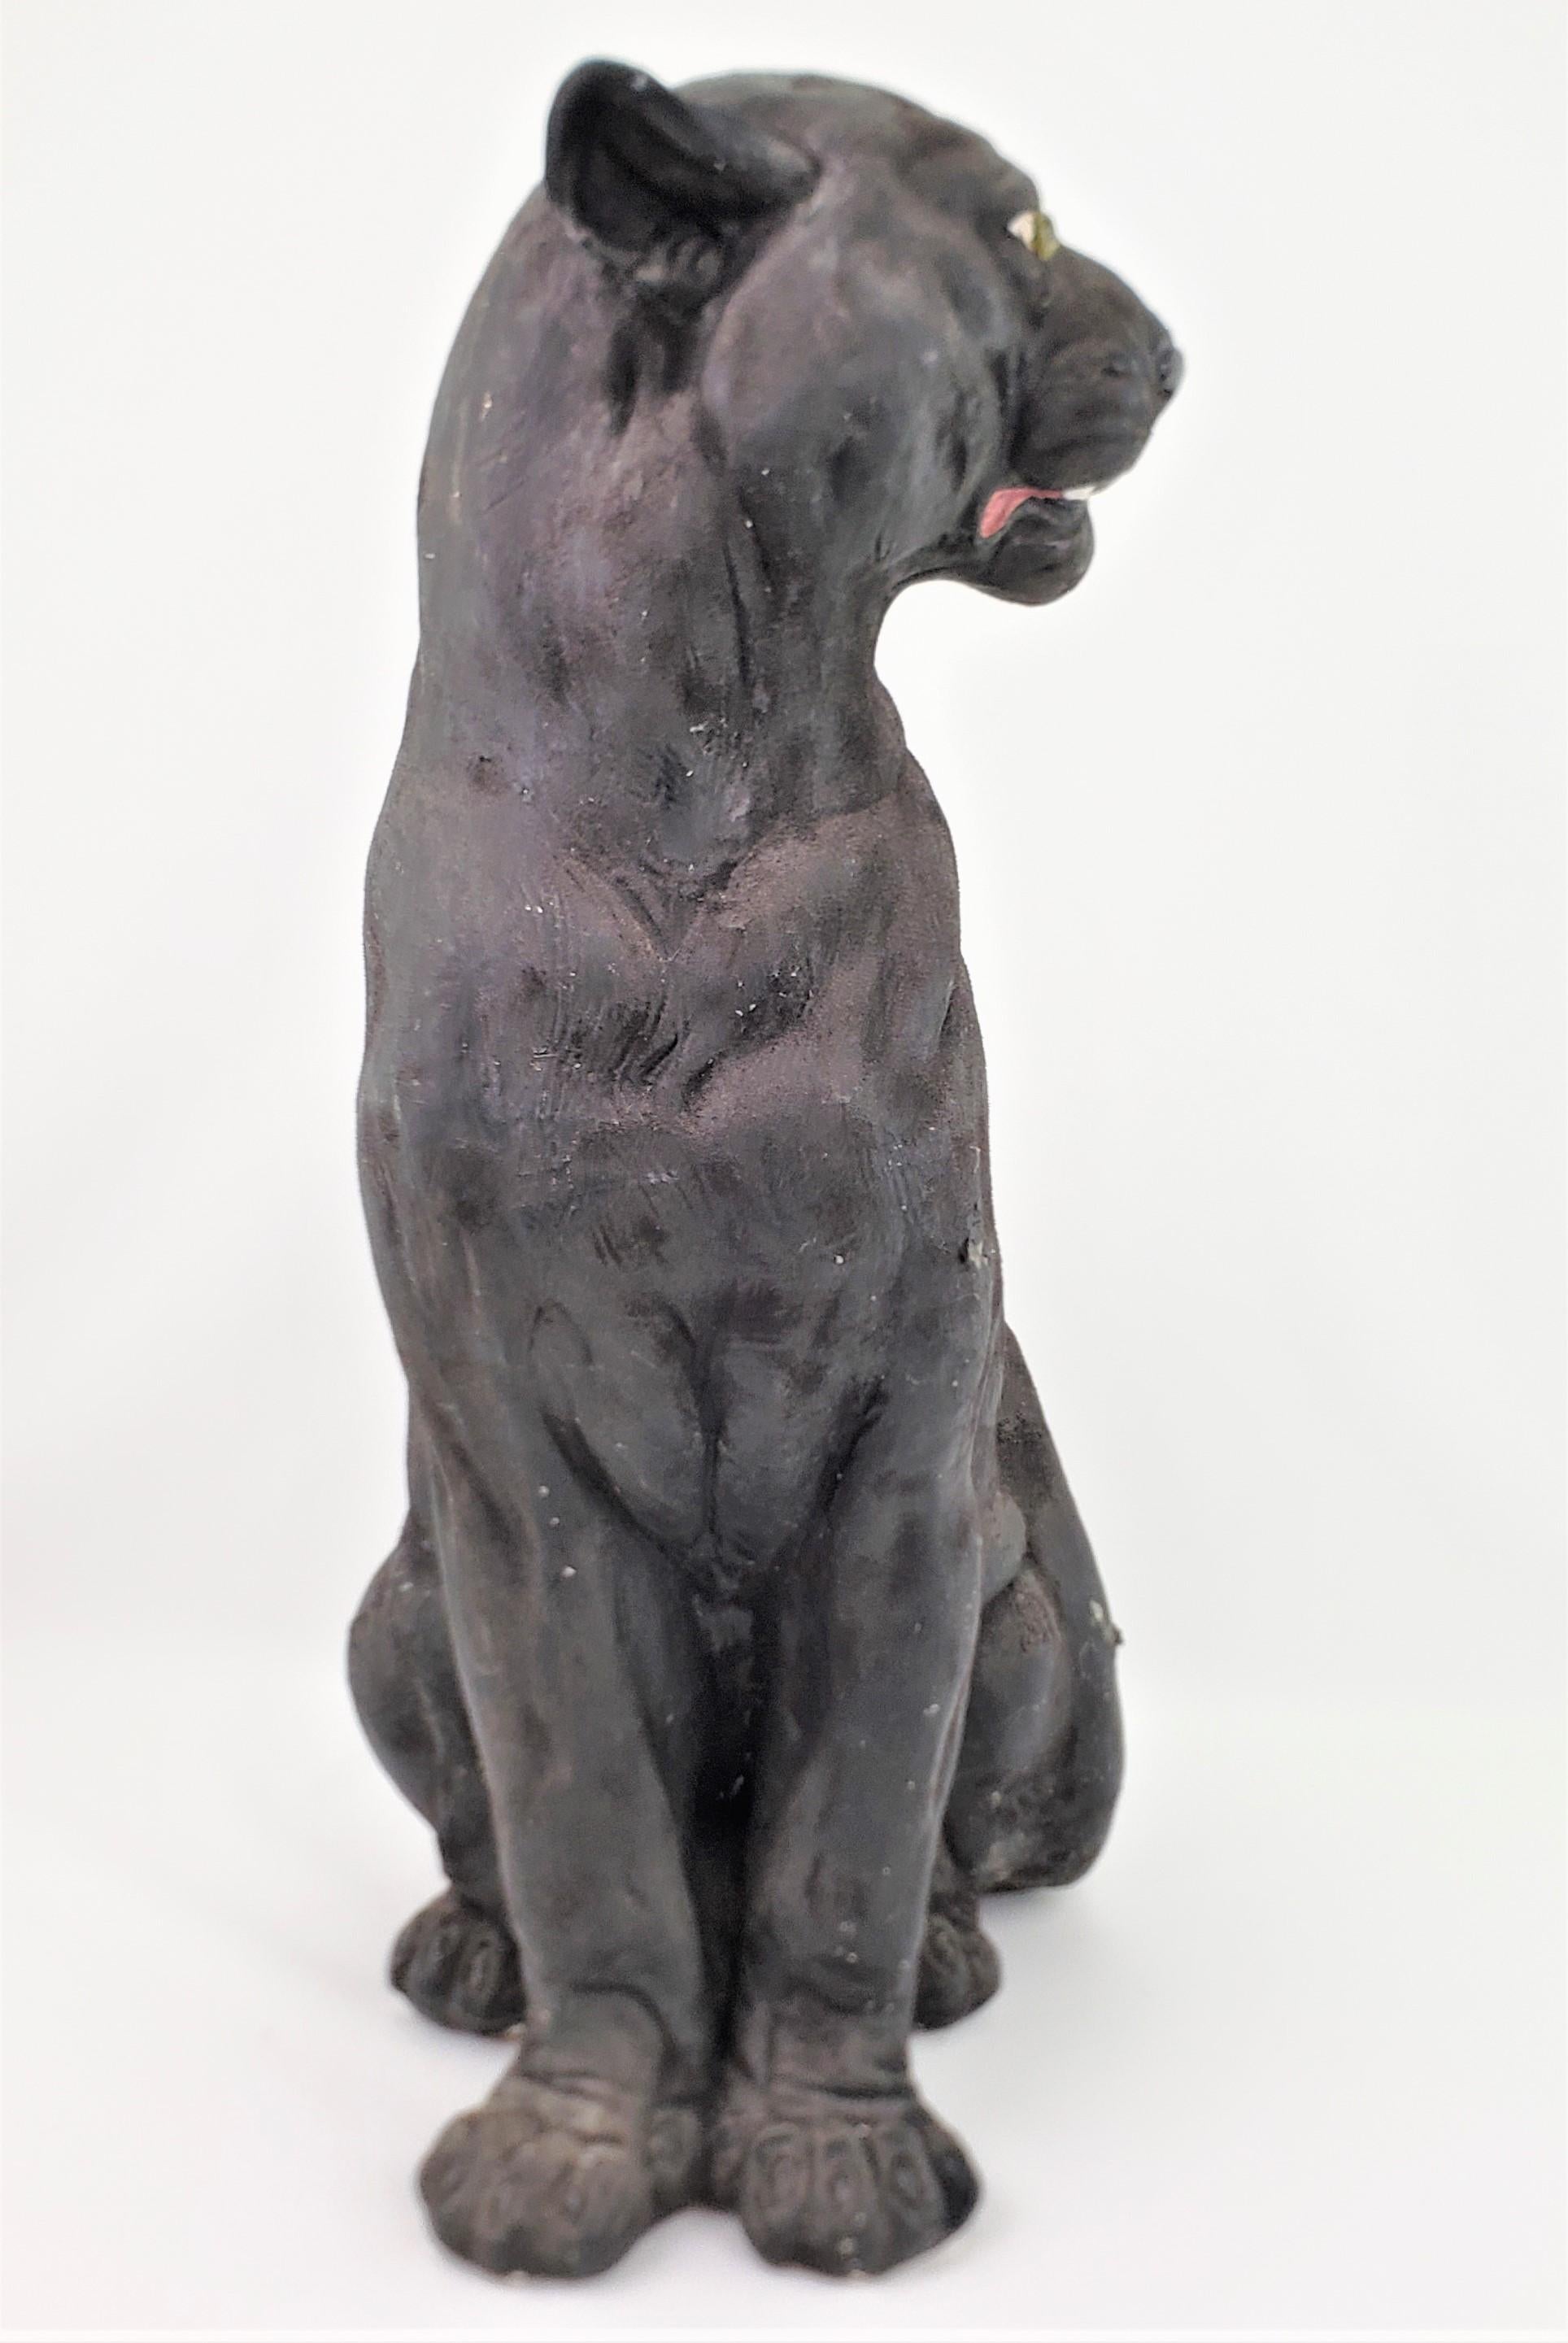 This large and substantial cast plaster sculpture is unsigned, but presumed to have been made in the United States in approximately 1960 in the period style. This large sculpture depicts a seated black panther and has been cold painted with a